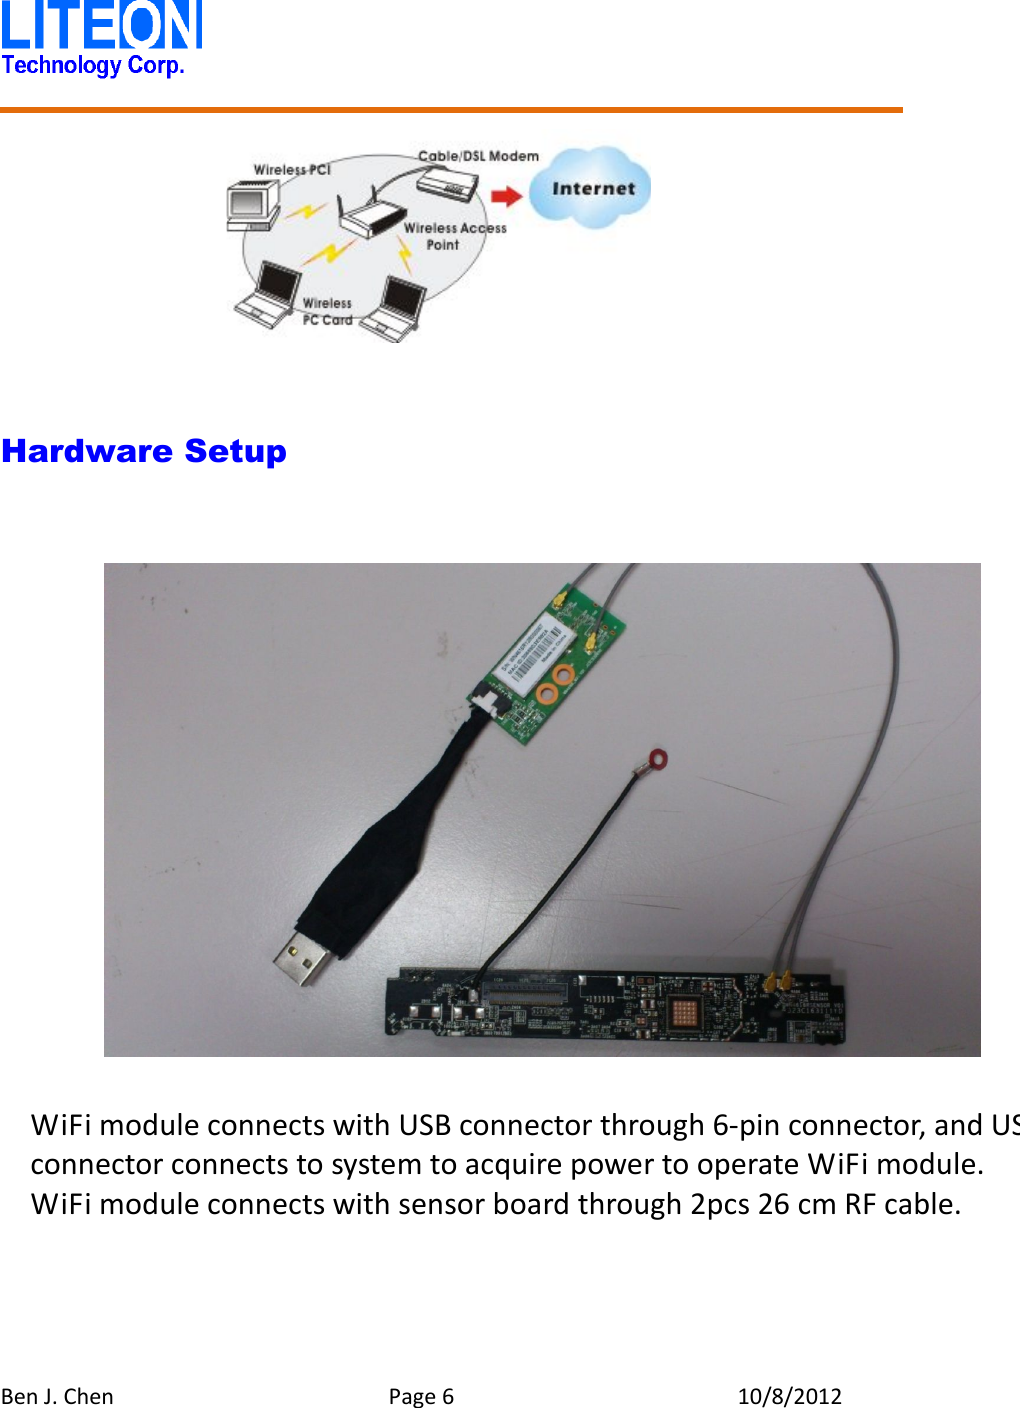   Ben J. Chen  Page 6  10/8/2012         Hardware Setup                    WiFi module connects with USB connector through 6-pin connector, and USB connector connects to system to acquire power to operate WiFi module. WiFi module connects with sensor board through 2pcs 26 cm RF cable. 